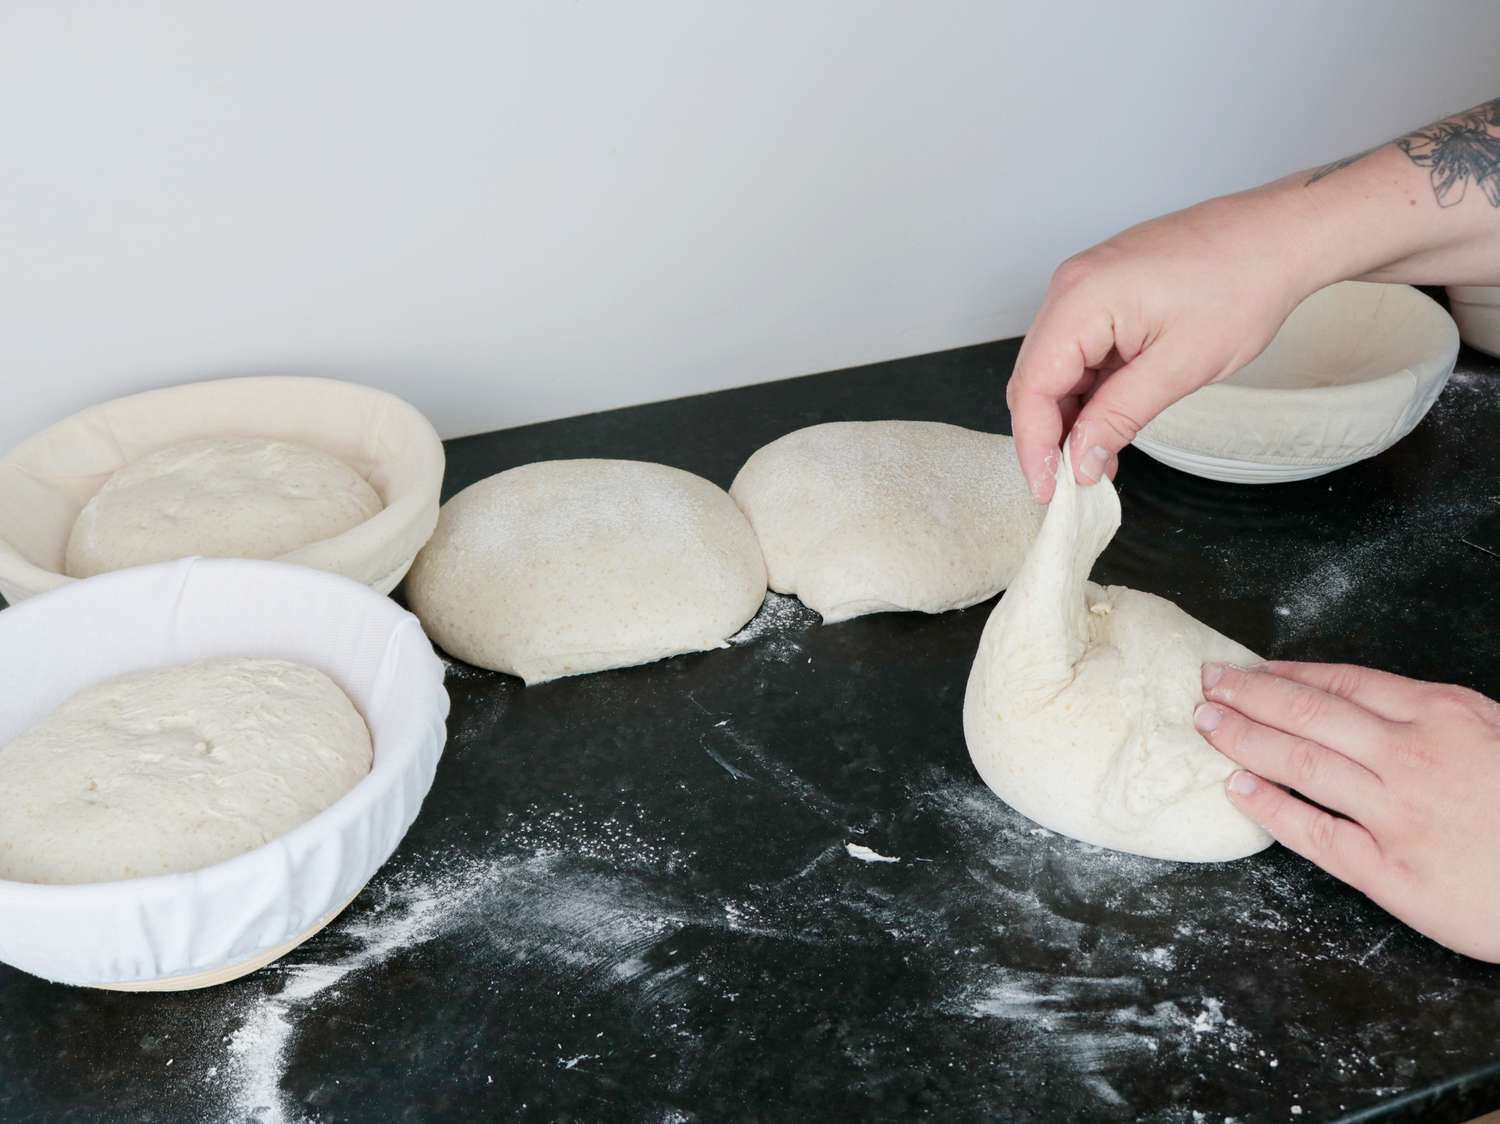 two proofing baskets with shaped bread dough in them on the left, a hand shaping bread dough into a round on the right